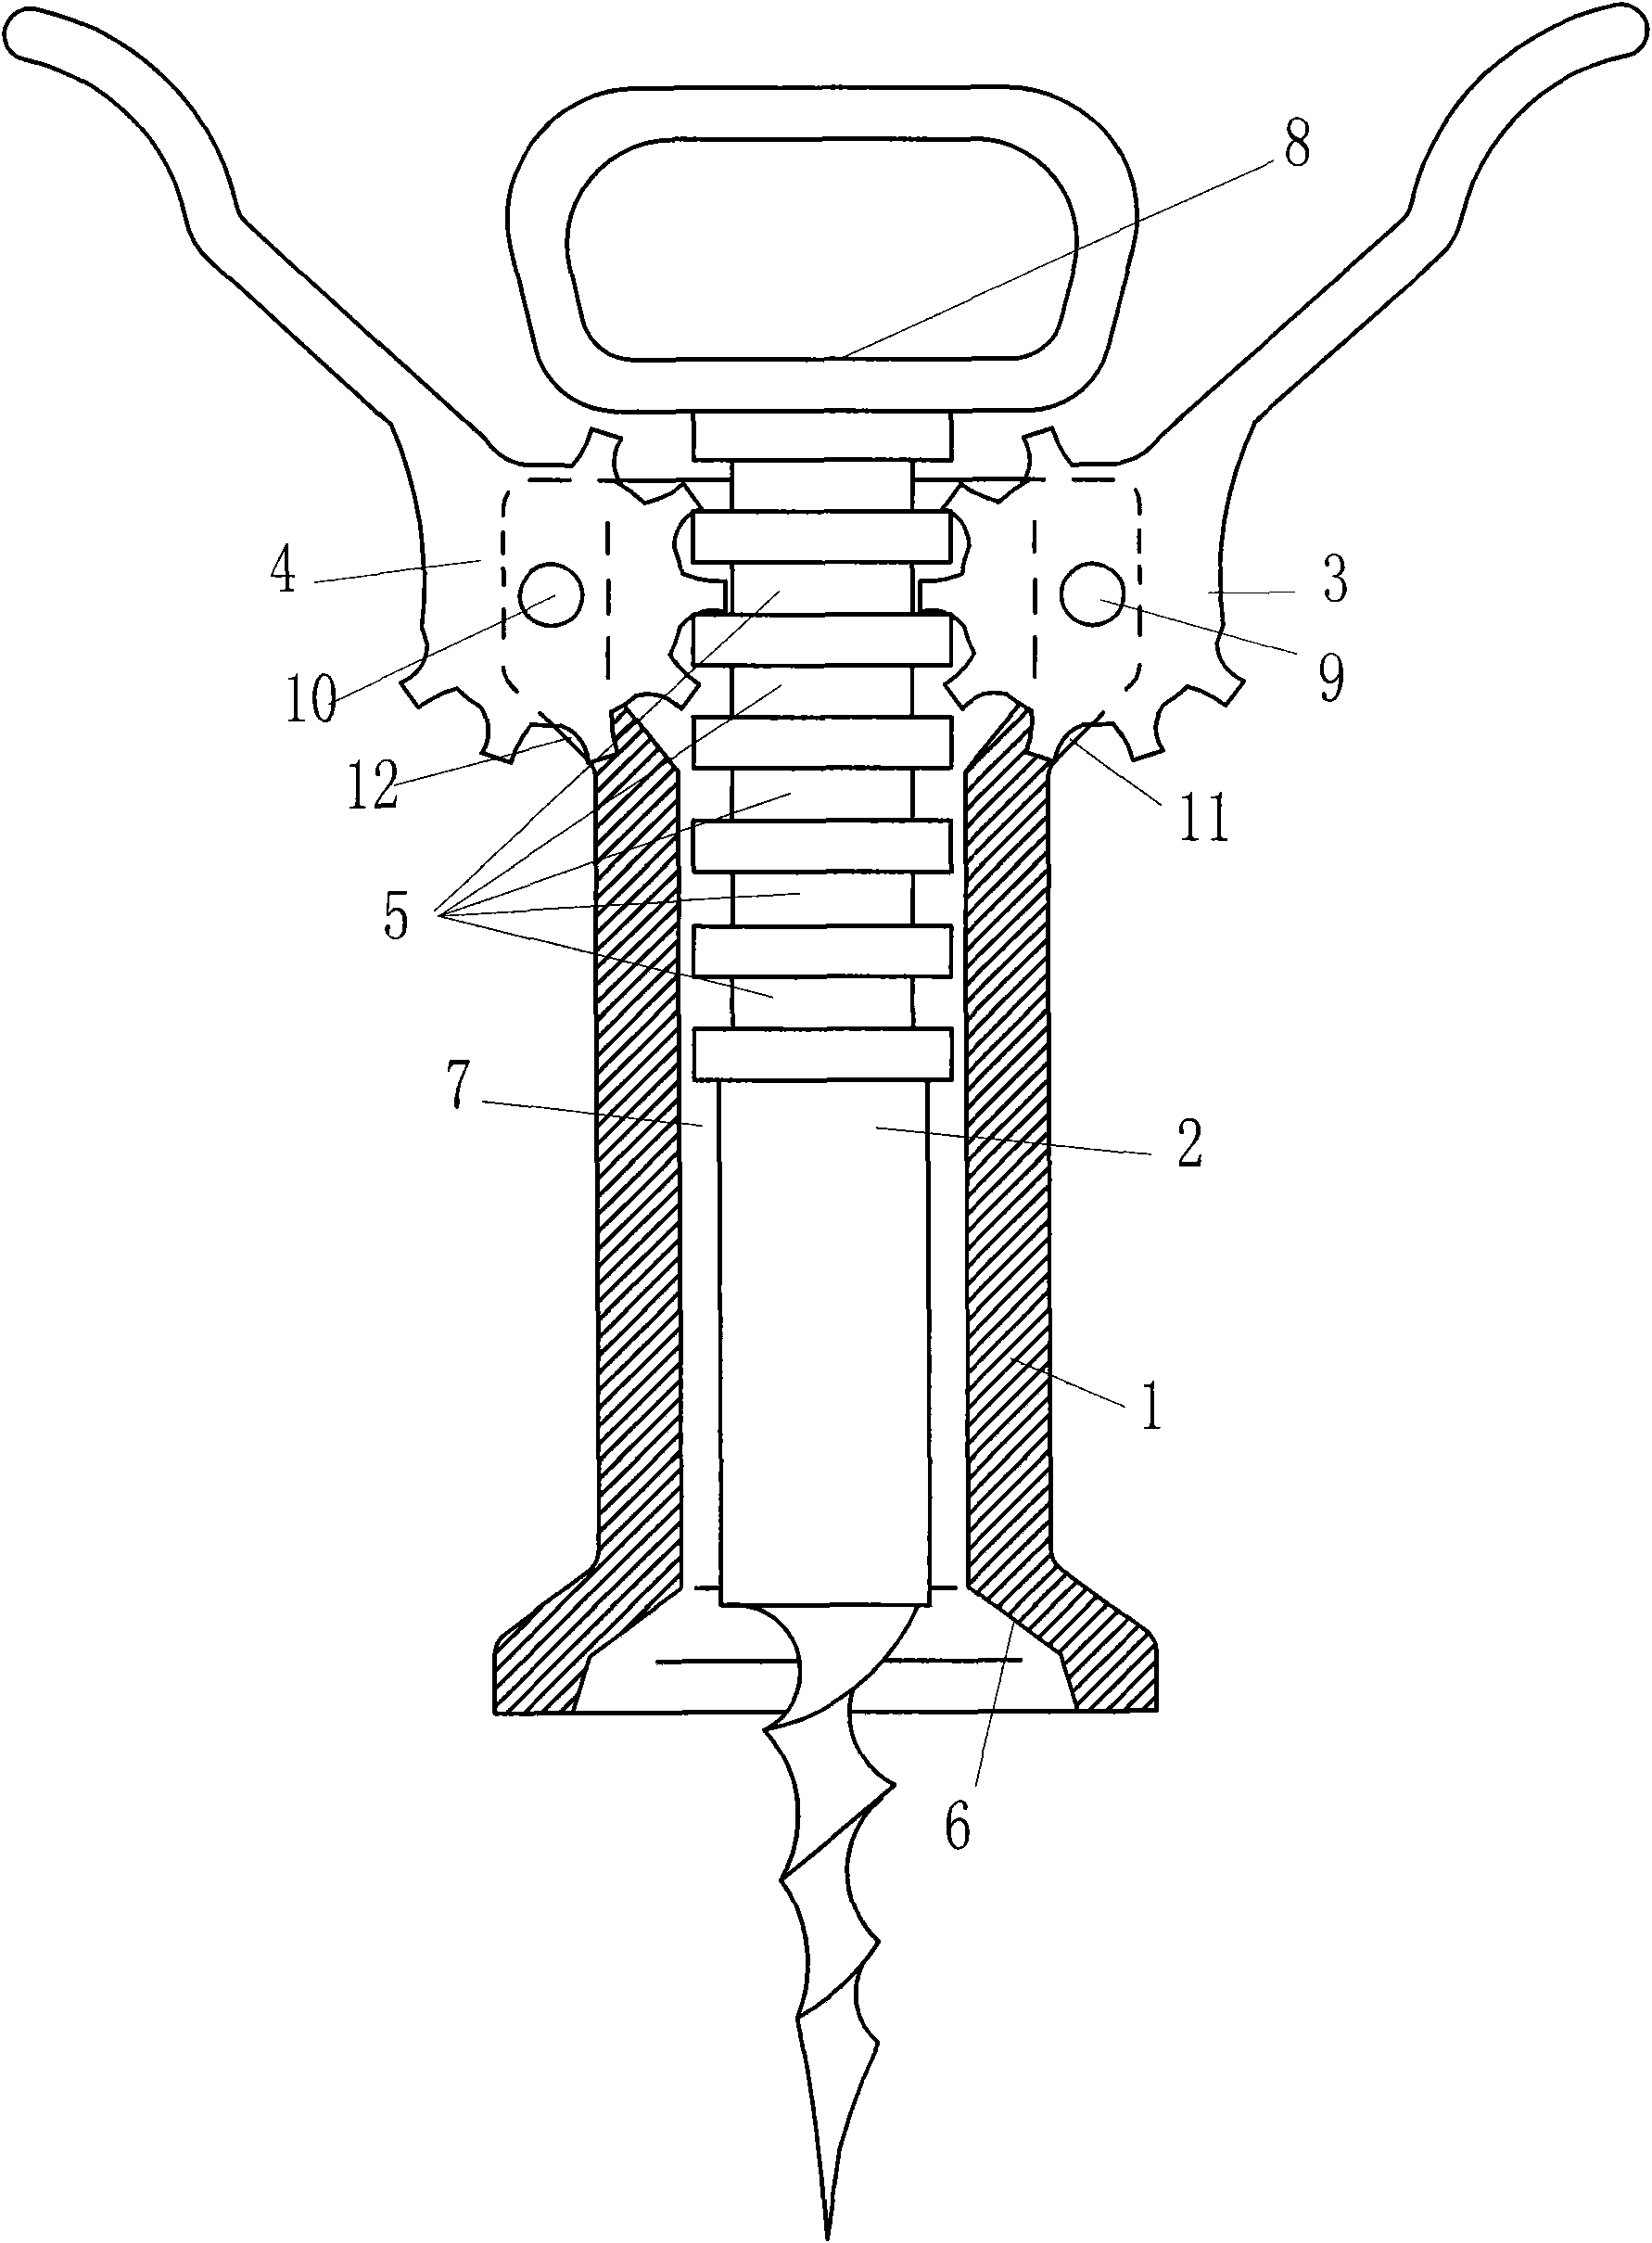 Bottle stopper extraction tool